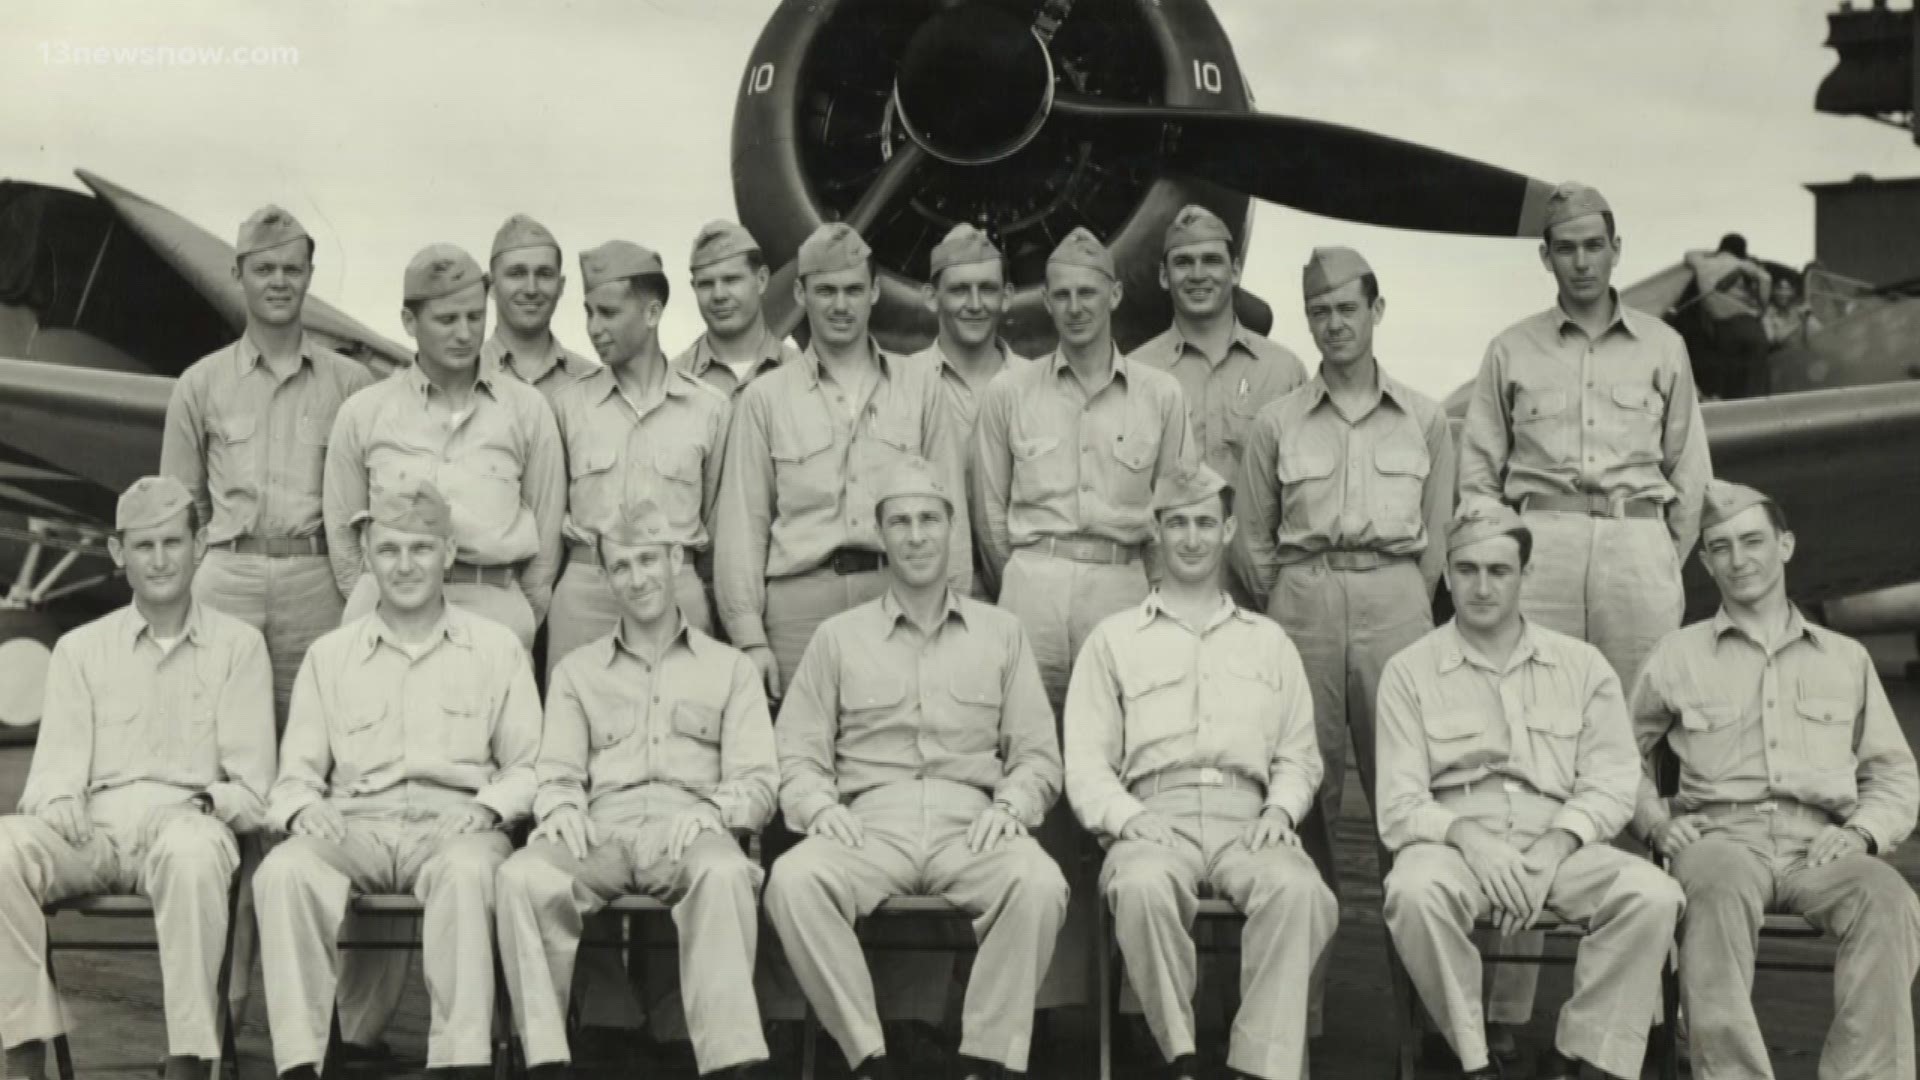 Dustry Kleiss was a Navy pilot in the World War Two Battle of Midway. Old Dominion University History professor Tim Orr helped write Kleiss's story.